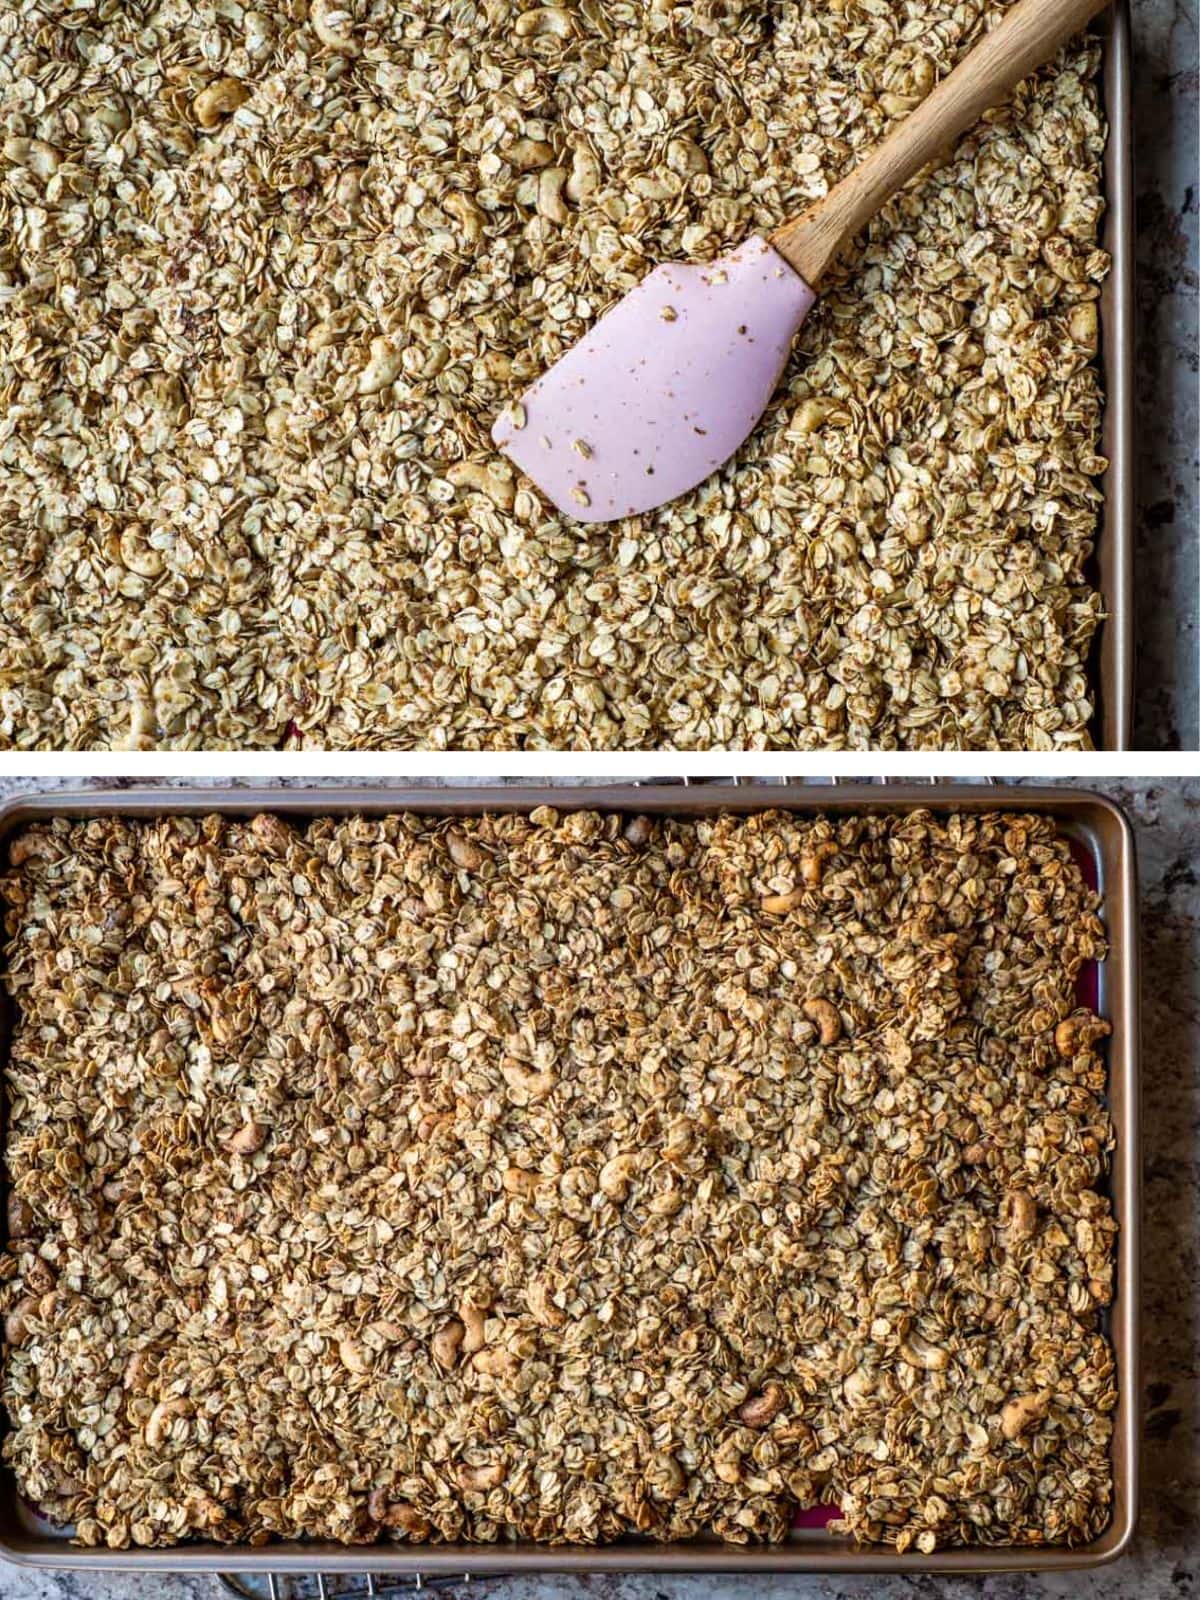 Maple granola spread out on a sheet pan before and after baking.